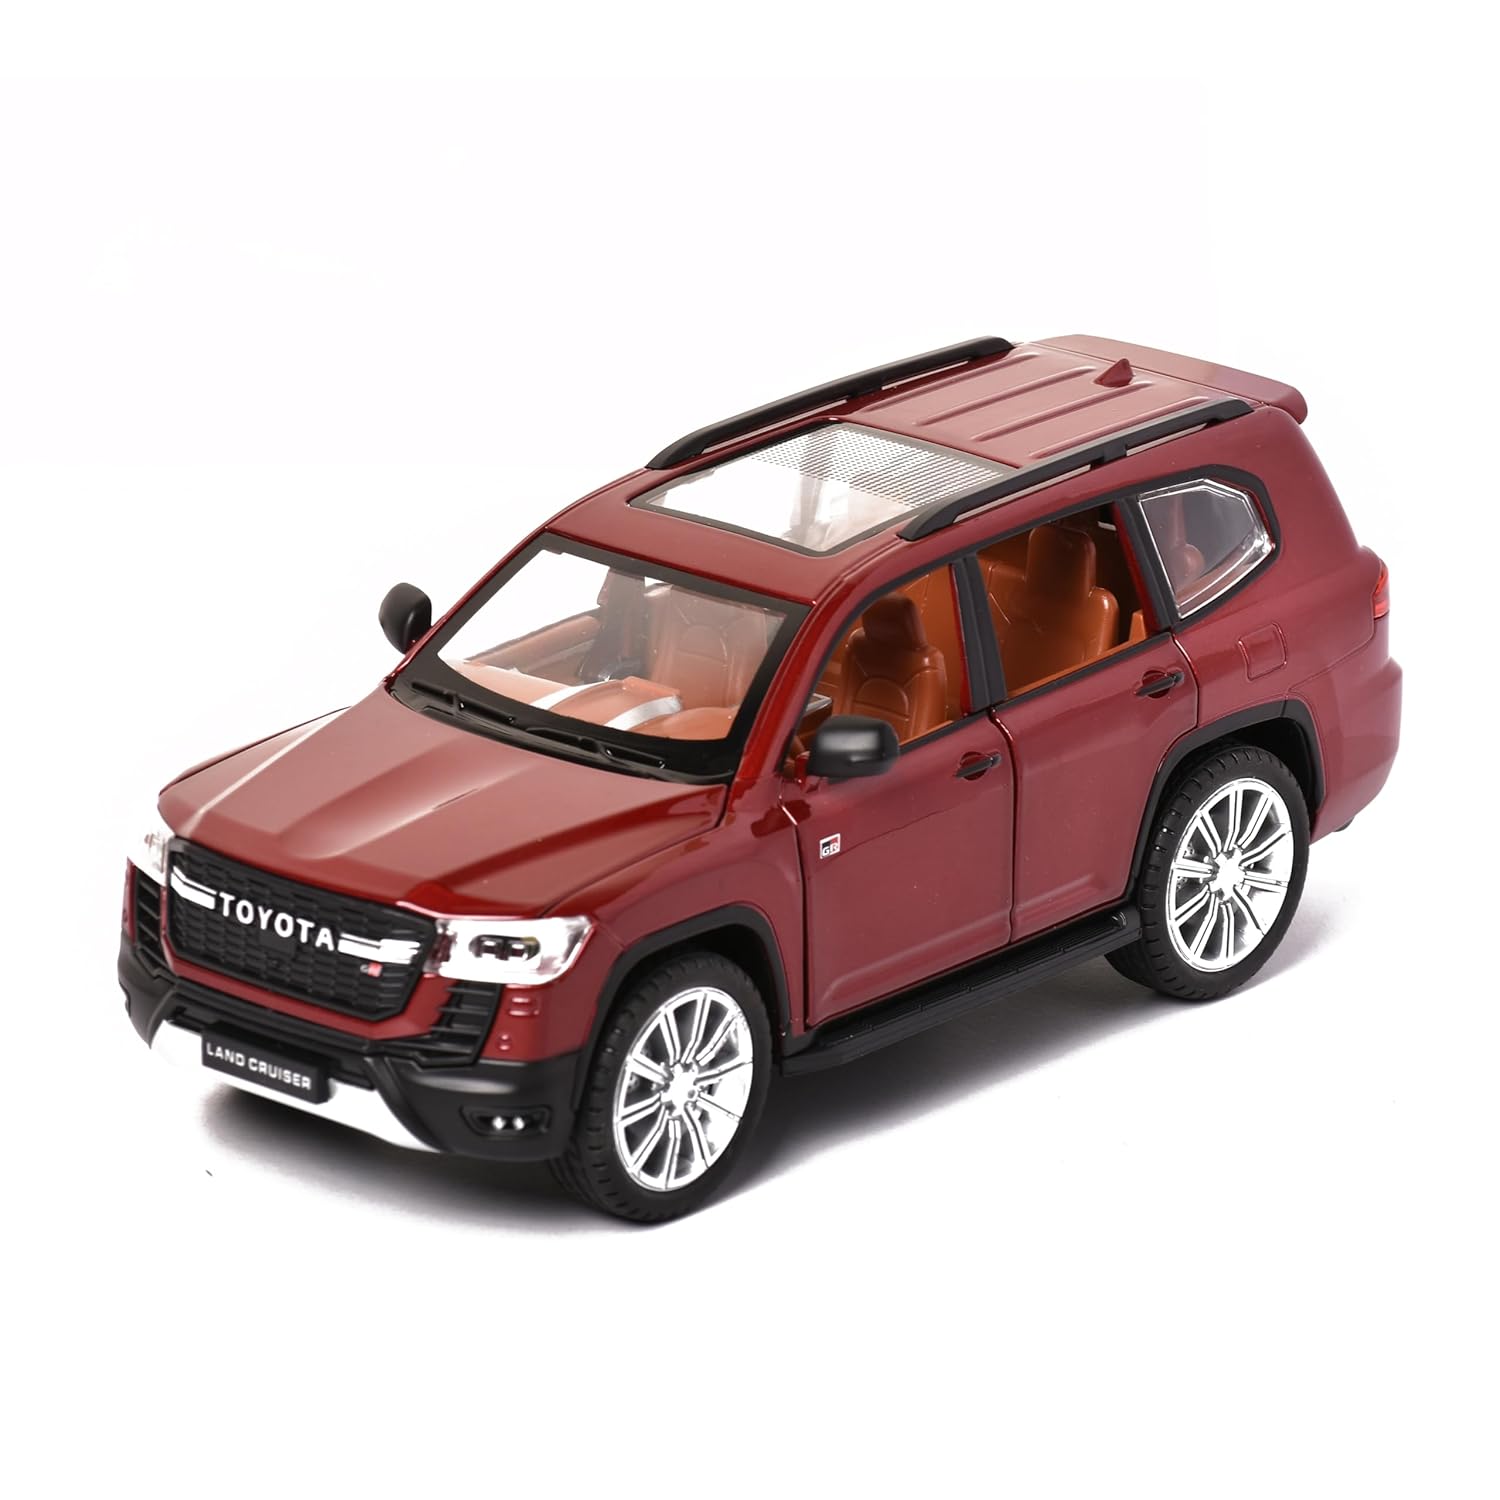 Braintastic Model Diecast Car Toy Vehicle Pull Back Friction Car with Openable Doors Light & Music Toys for Kids Age 3+ Years (Land Cruiser Red)